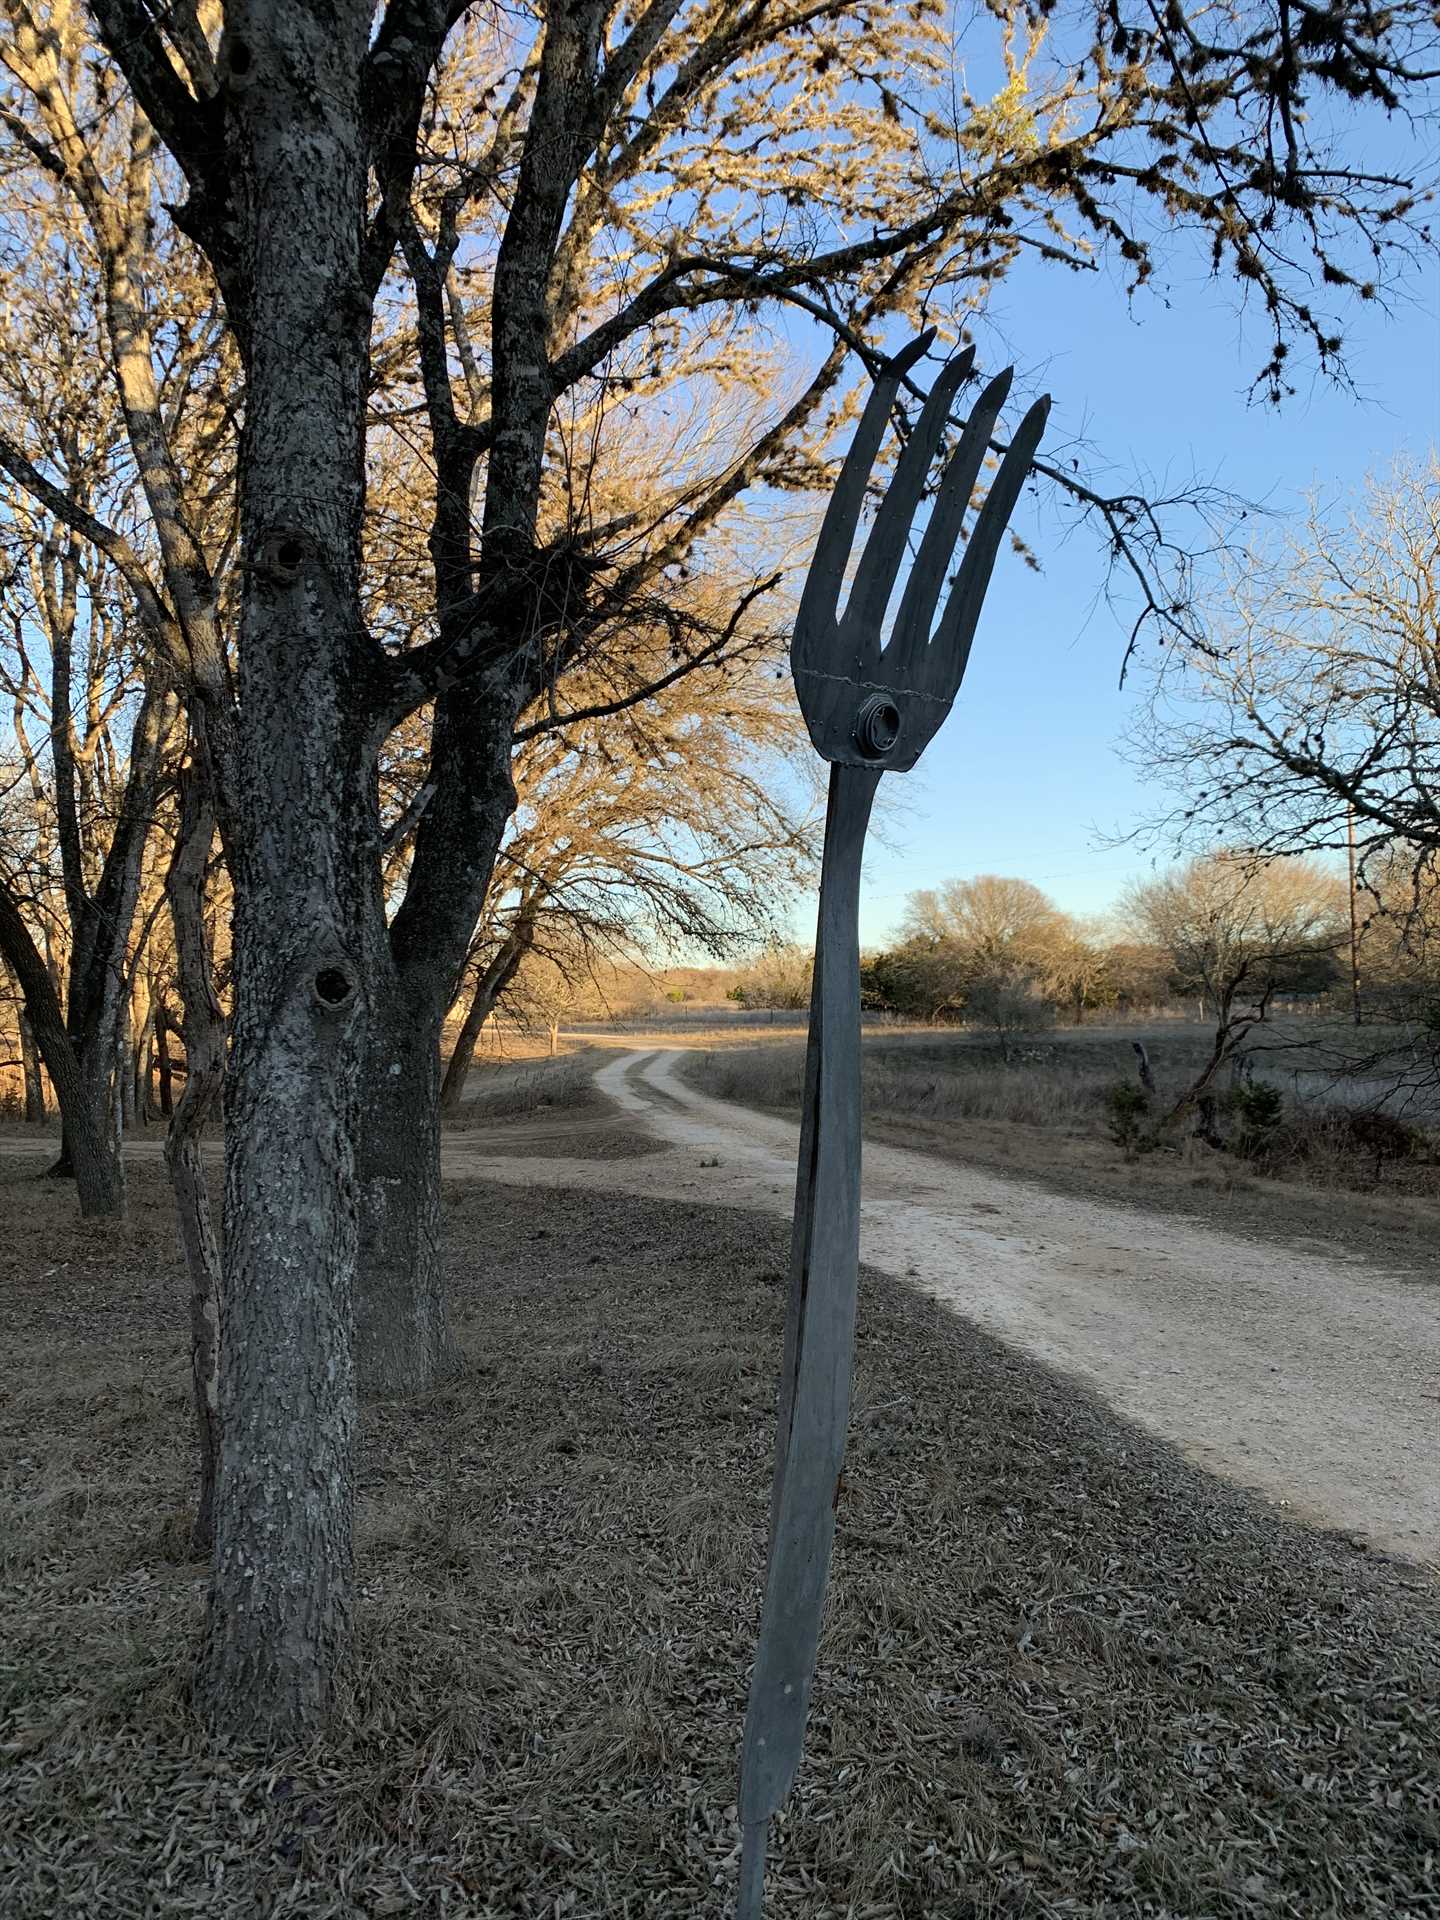                                                 What do you do when you encounter a fork in the road? Well, luckily, this one's off to the side!